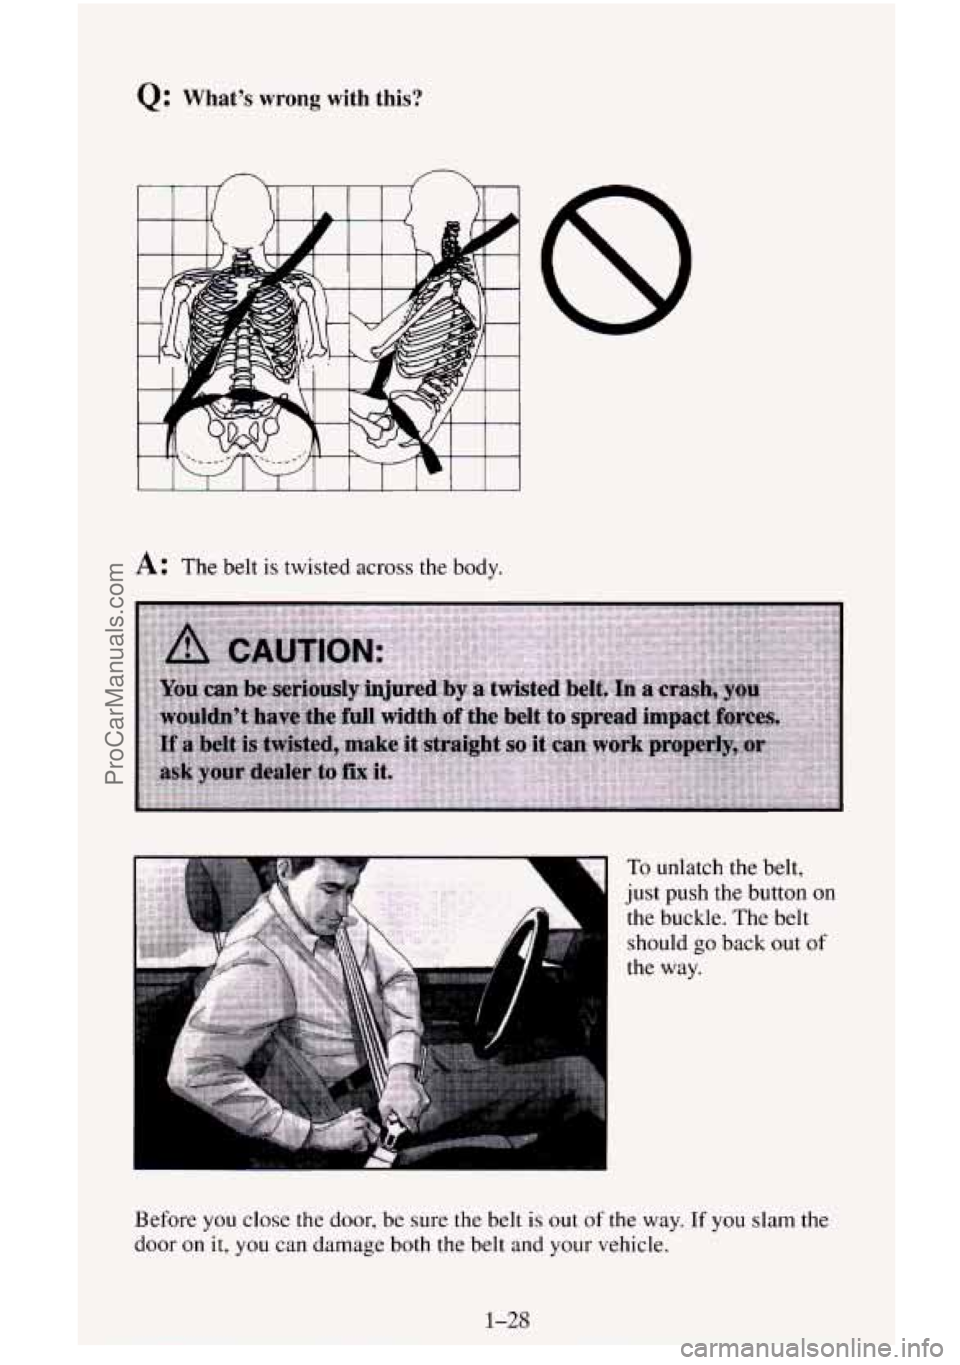 CHEVROLET SUBURBAN 1996 Service Manual Q: Whats  wrong  with  this? 
I I I 1 I 1 I I 1 I I 
A: The belt is twisted across the  body. 
To unlatch the belt, 
just  push the button 
on 
the buckle.  The belt 
should 
go back  out of 
the way